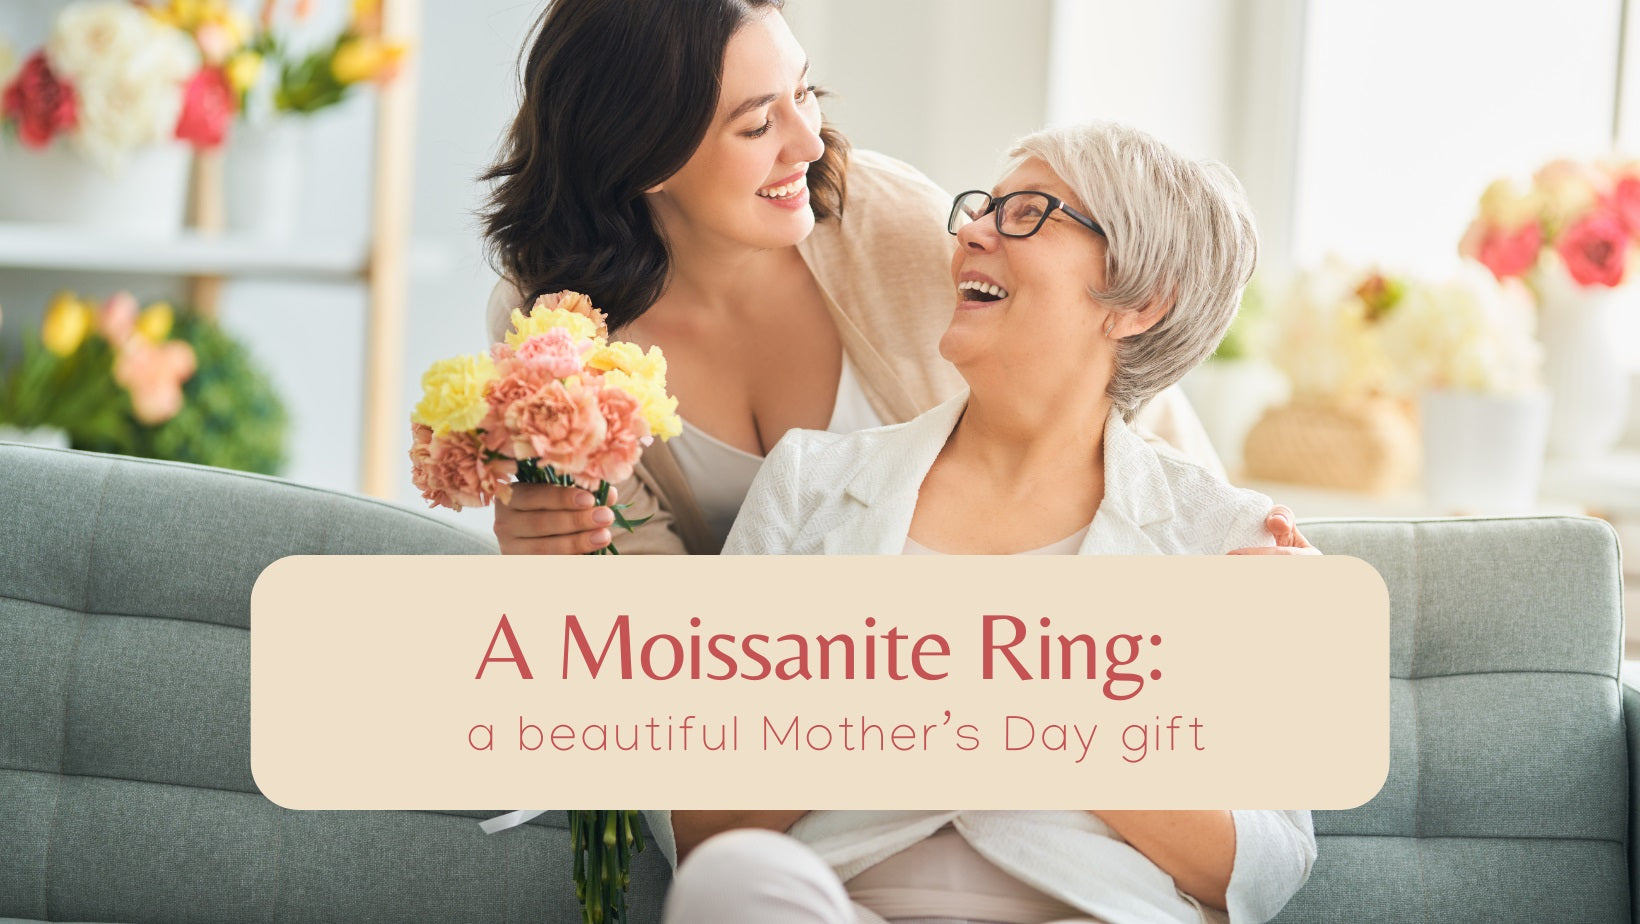 A Beautiful Mother’s Day Gift: A Moissanite Ring